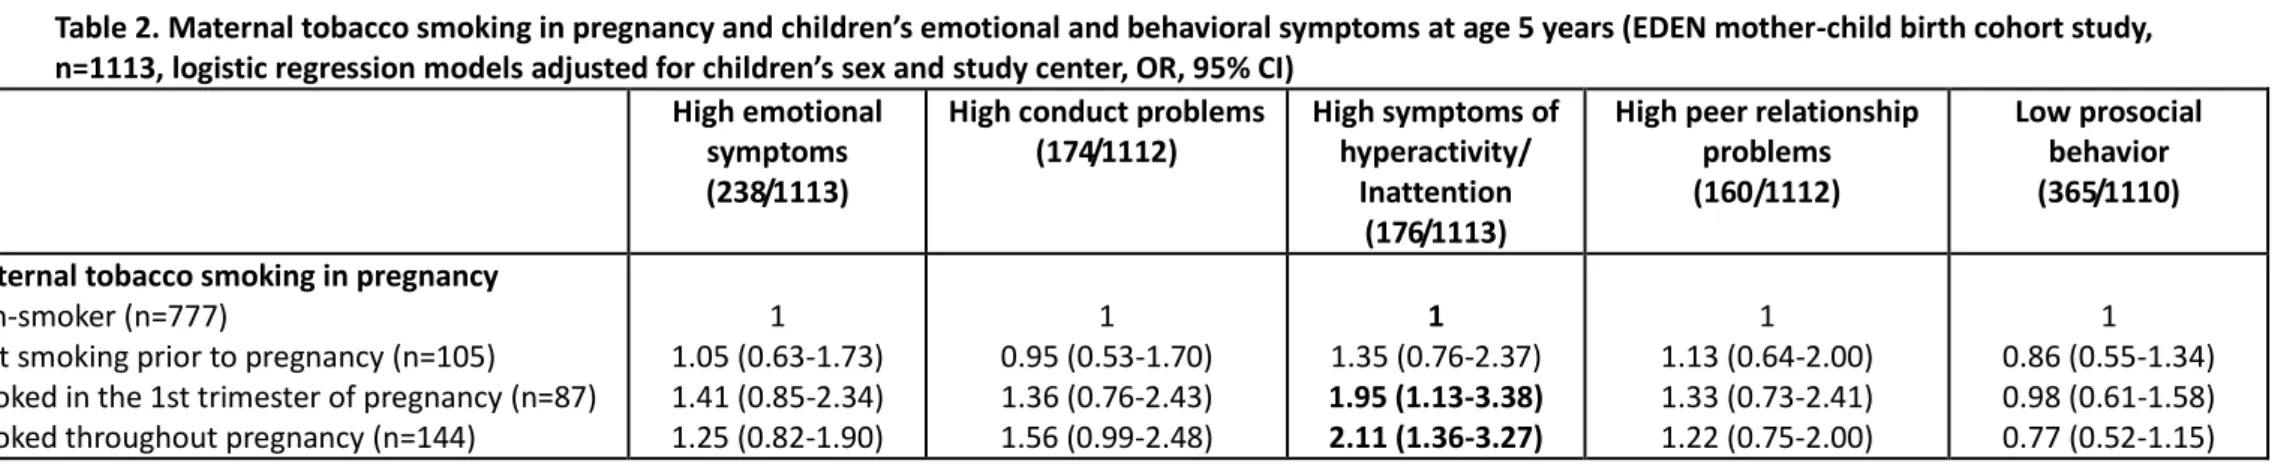 Table 2. Maternal tobacco smoking in pregnancy and children’s emotional and behavioral symptoms at age 5 years (EDEN mother-child birth cohort study,  n=1113, logistic regression models adjusted for children’s sex and study center, OR, 95% CI) 